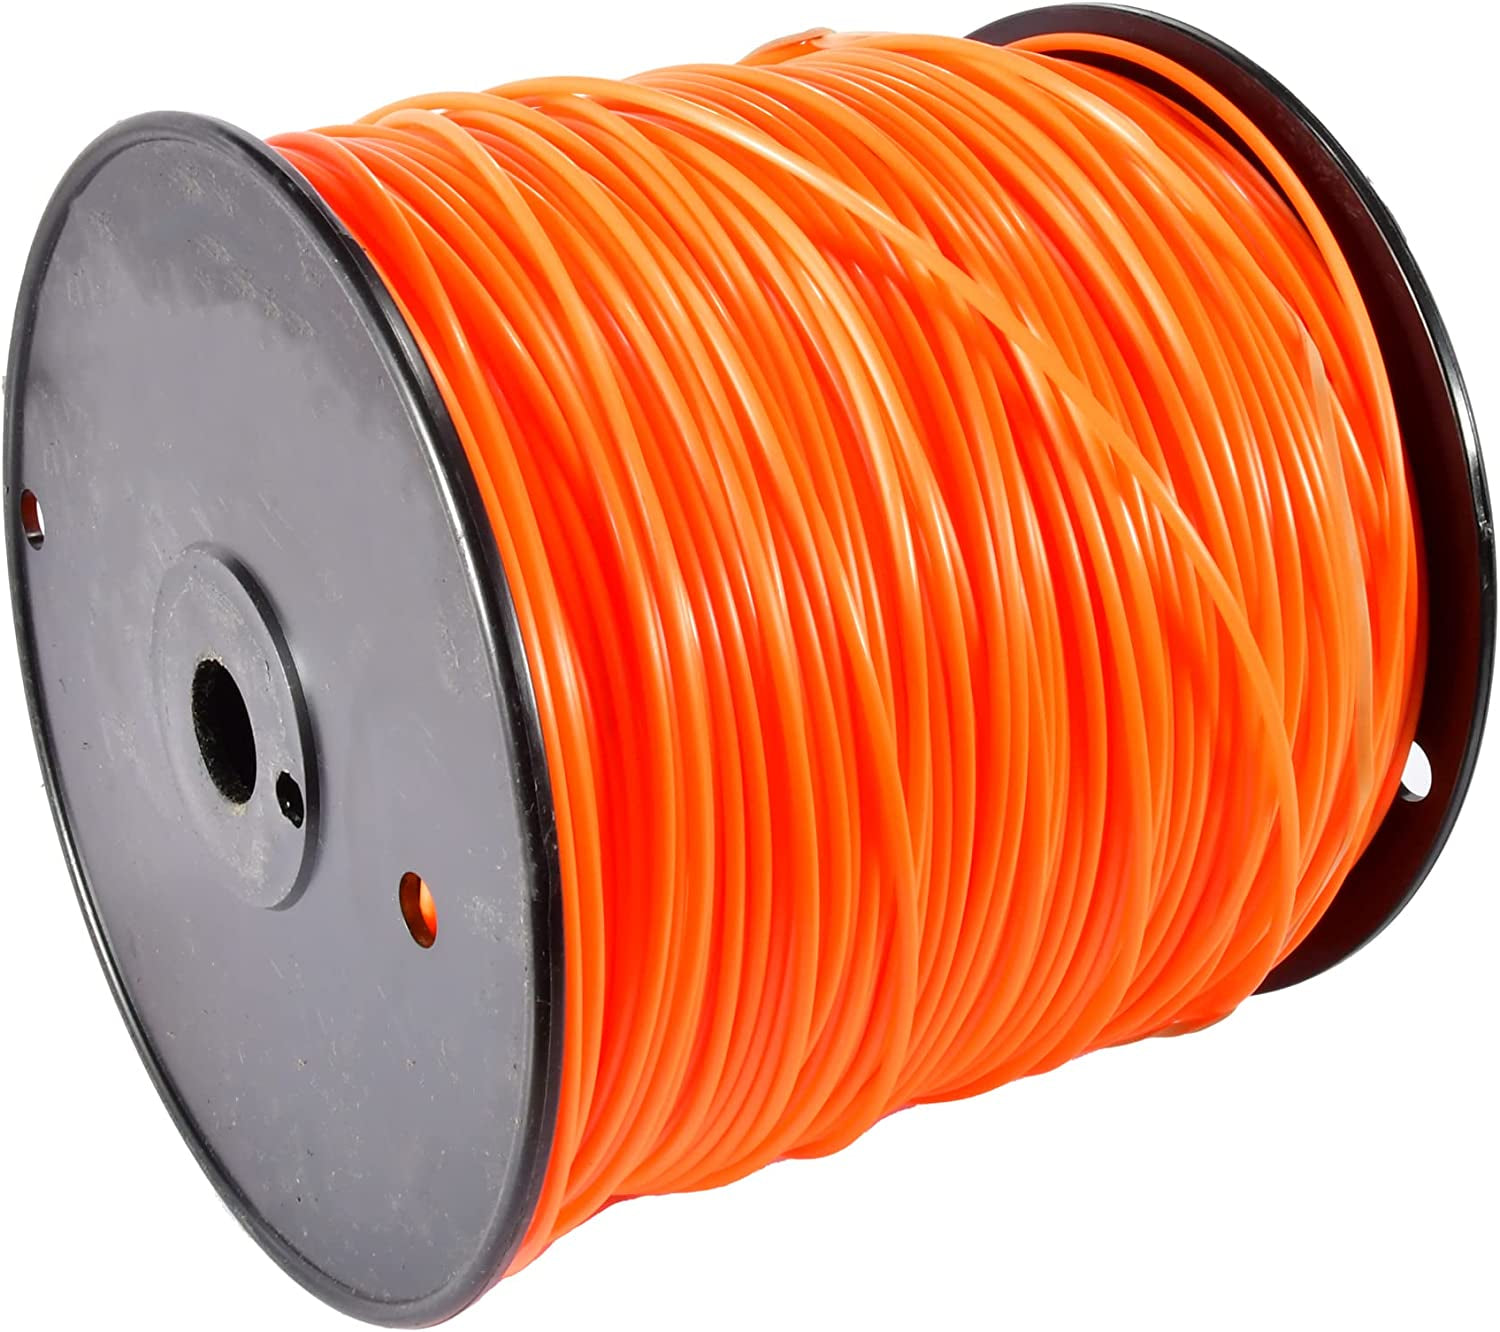 MaxPower, Maxpower 333695 Residential Grade round .095-Inch Trimmer Line 855-Foot Length,Orange